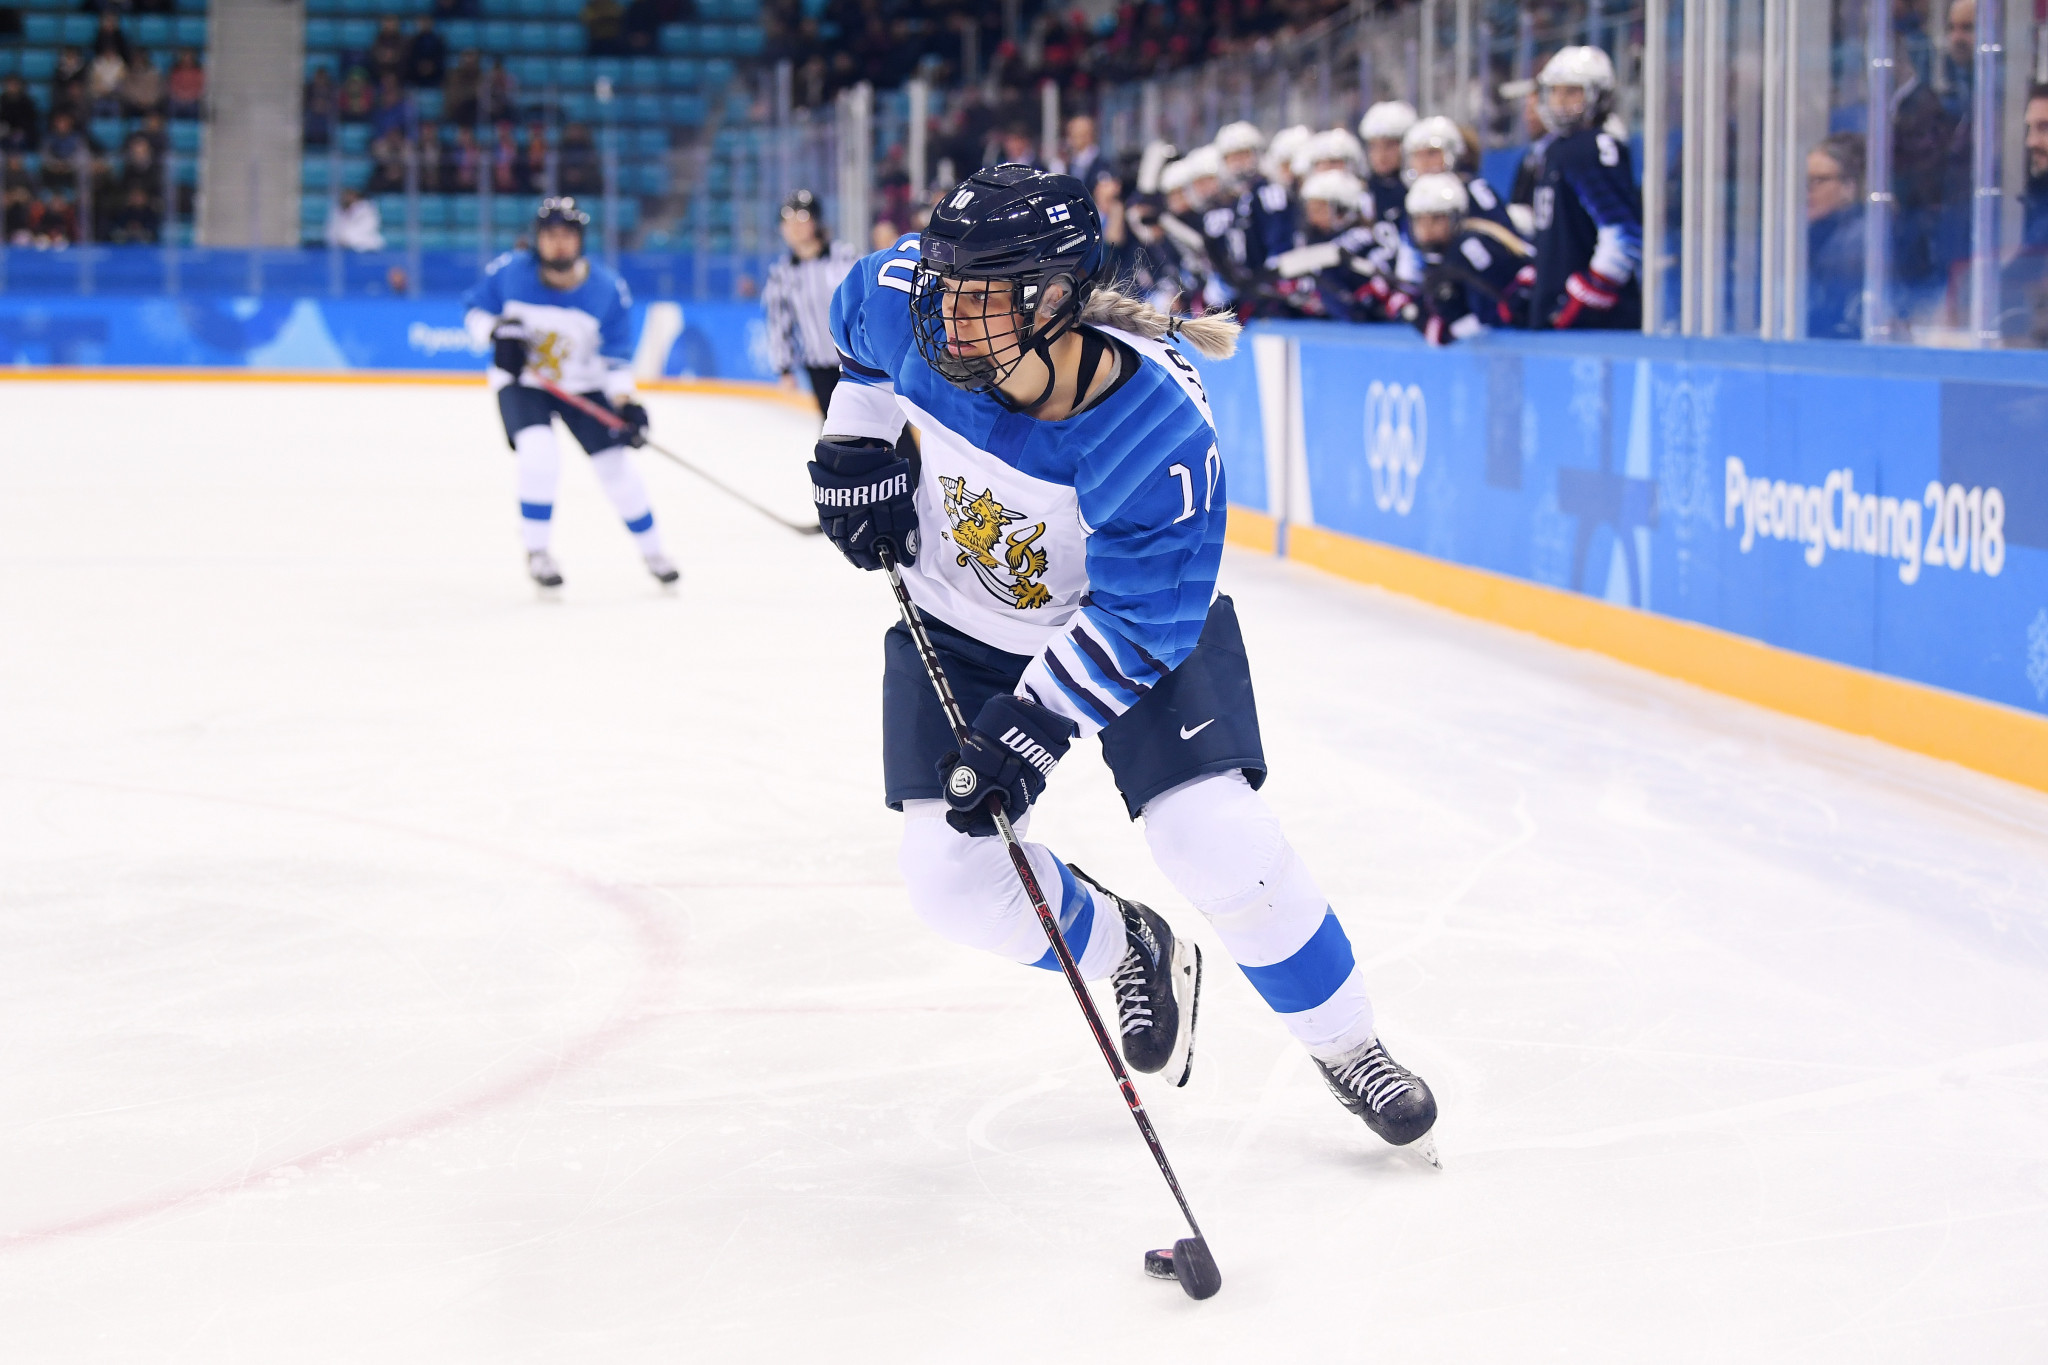 Finland's Linda Välimäki has announced her retirement from ice hockey at the age of 29 ©Getty Images